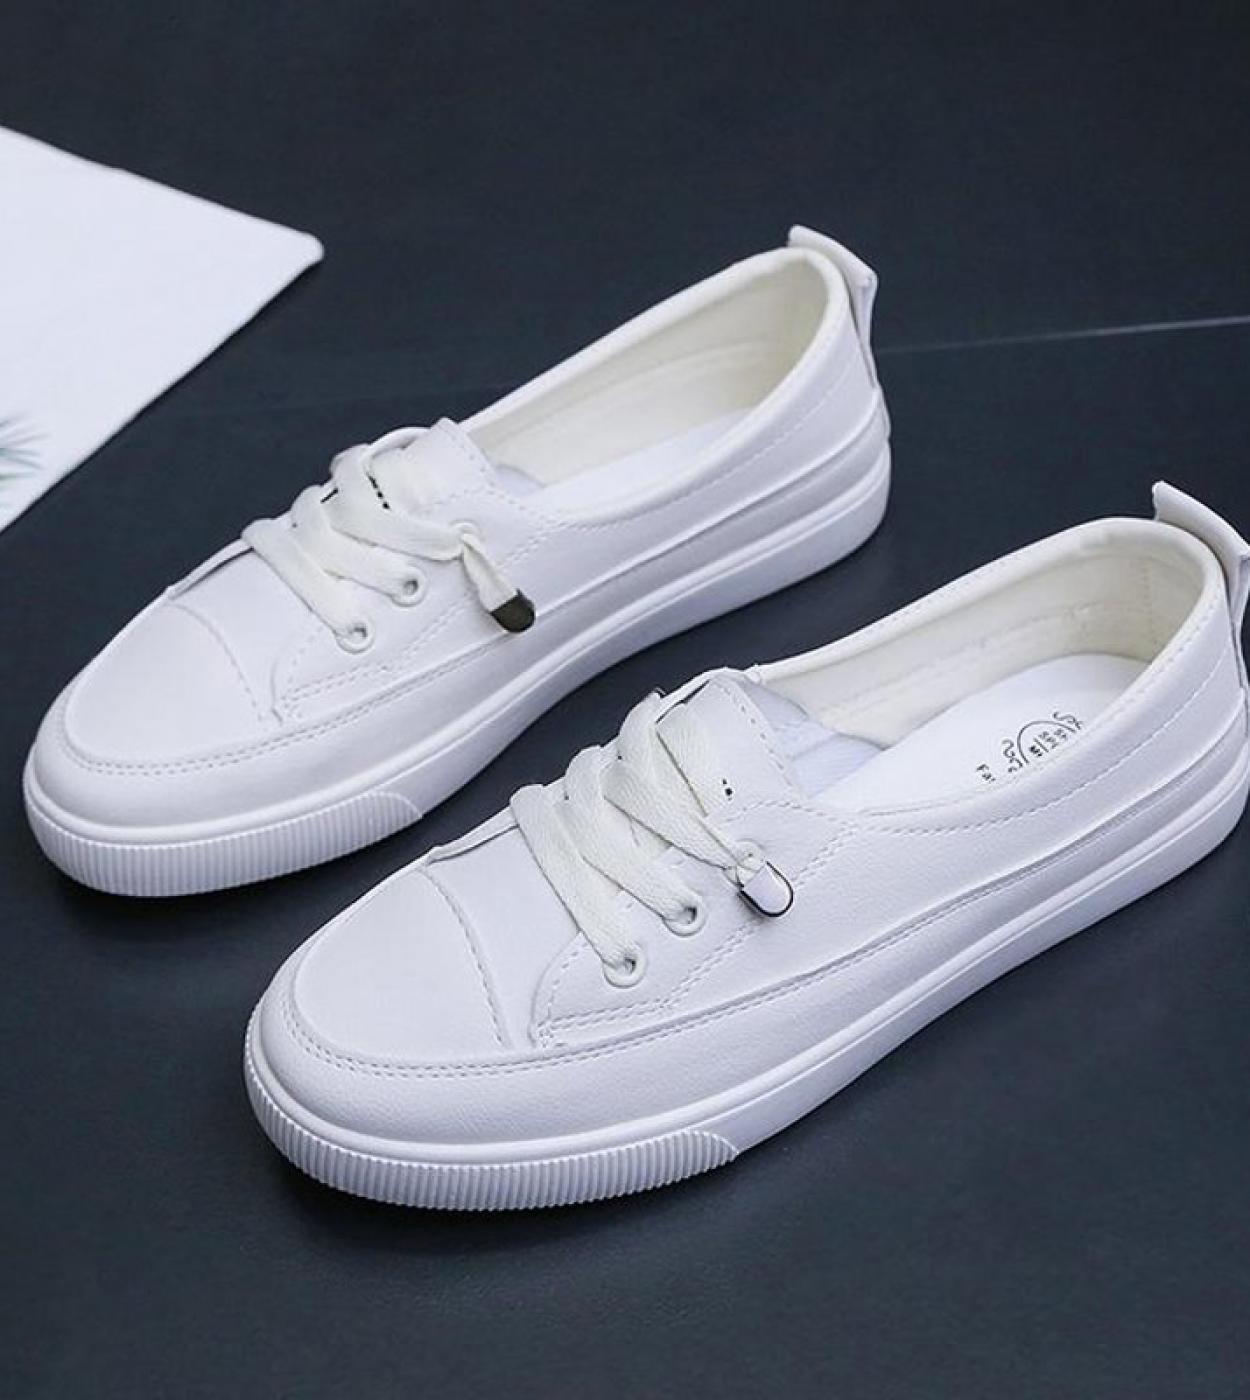 Comemore  New Moccasins Woman Summer Loafers White Flat Rubber Sole Vulcanize Sports Flat Shoes Female Pu Leather Sneake